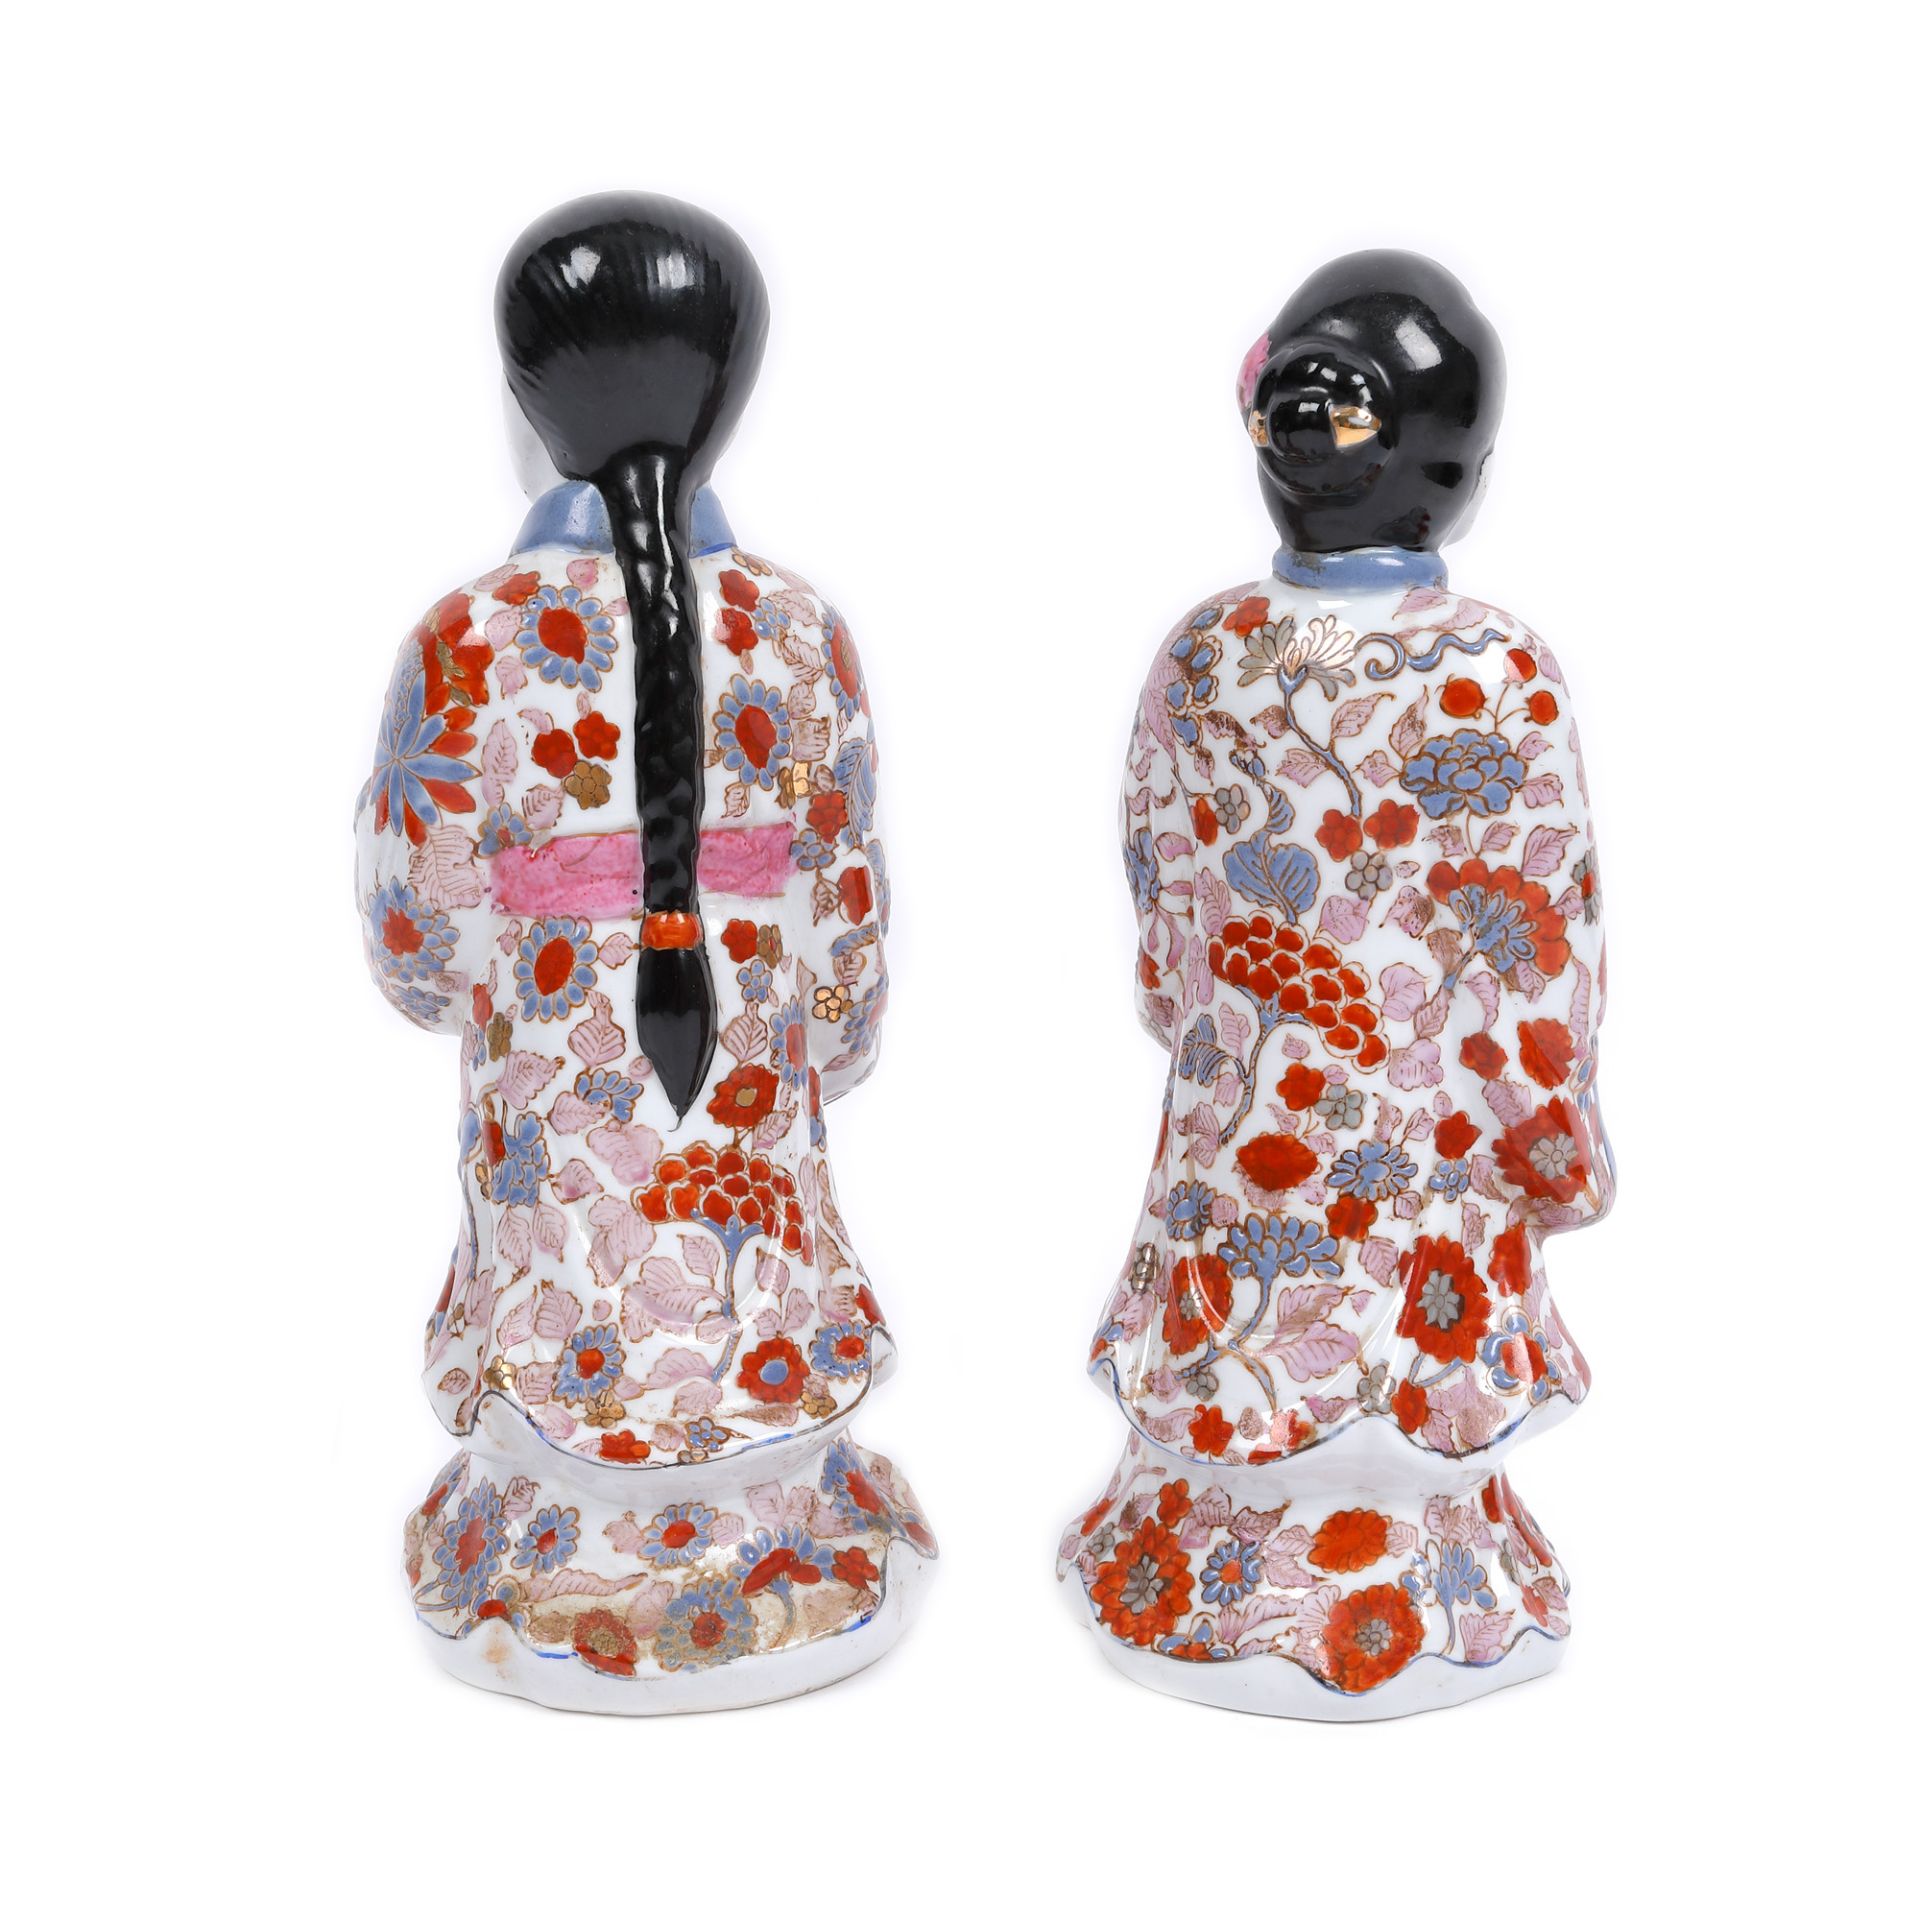 Pair of painted porcelain statues, Imari, representing a couple of noble people, Japan, first half o - Image 2 of 4